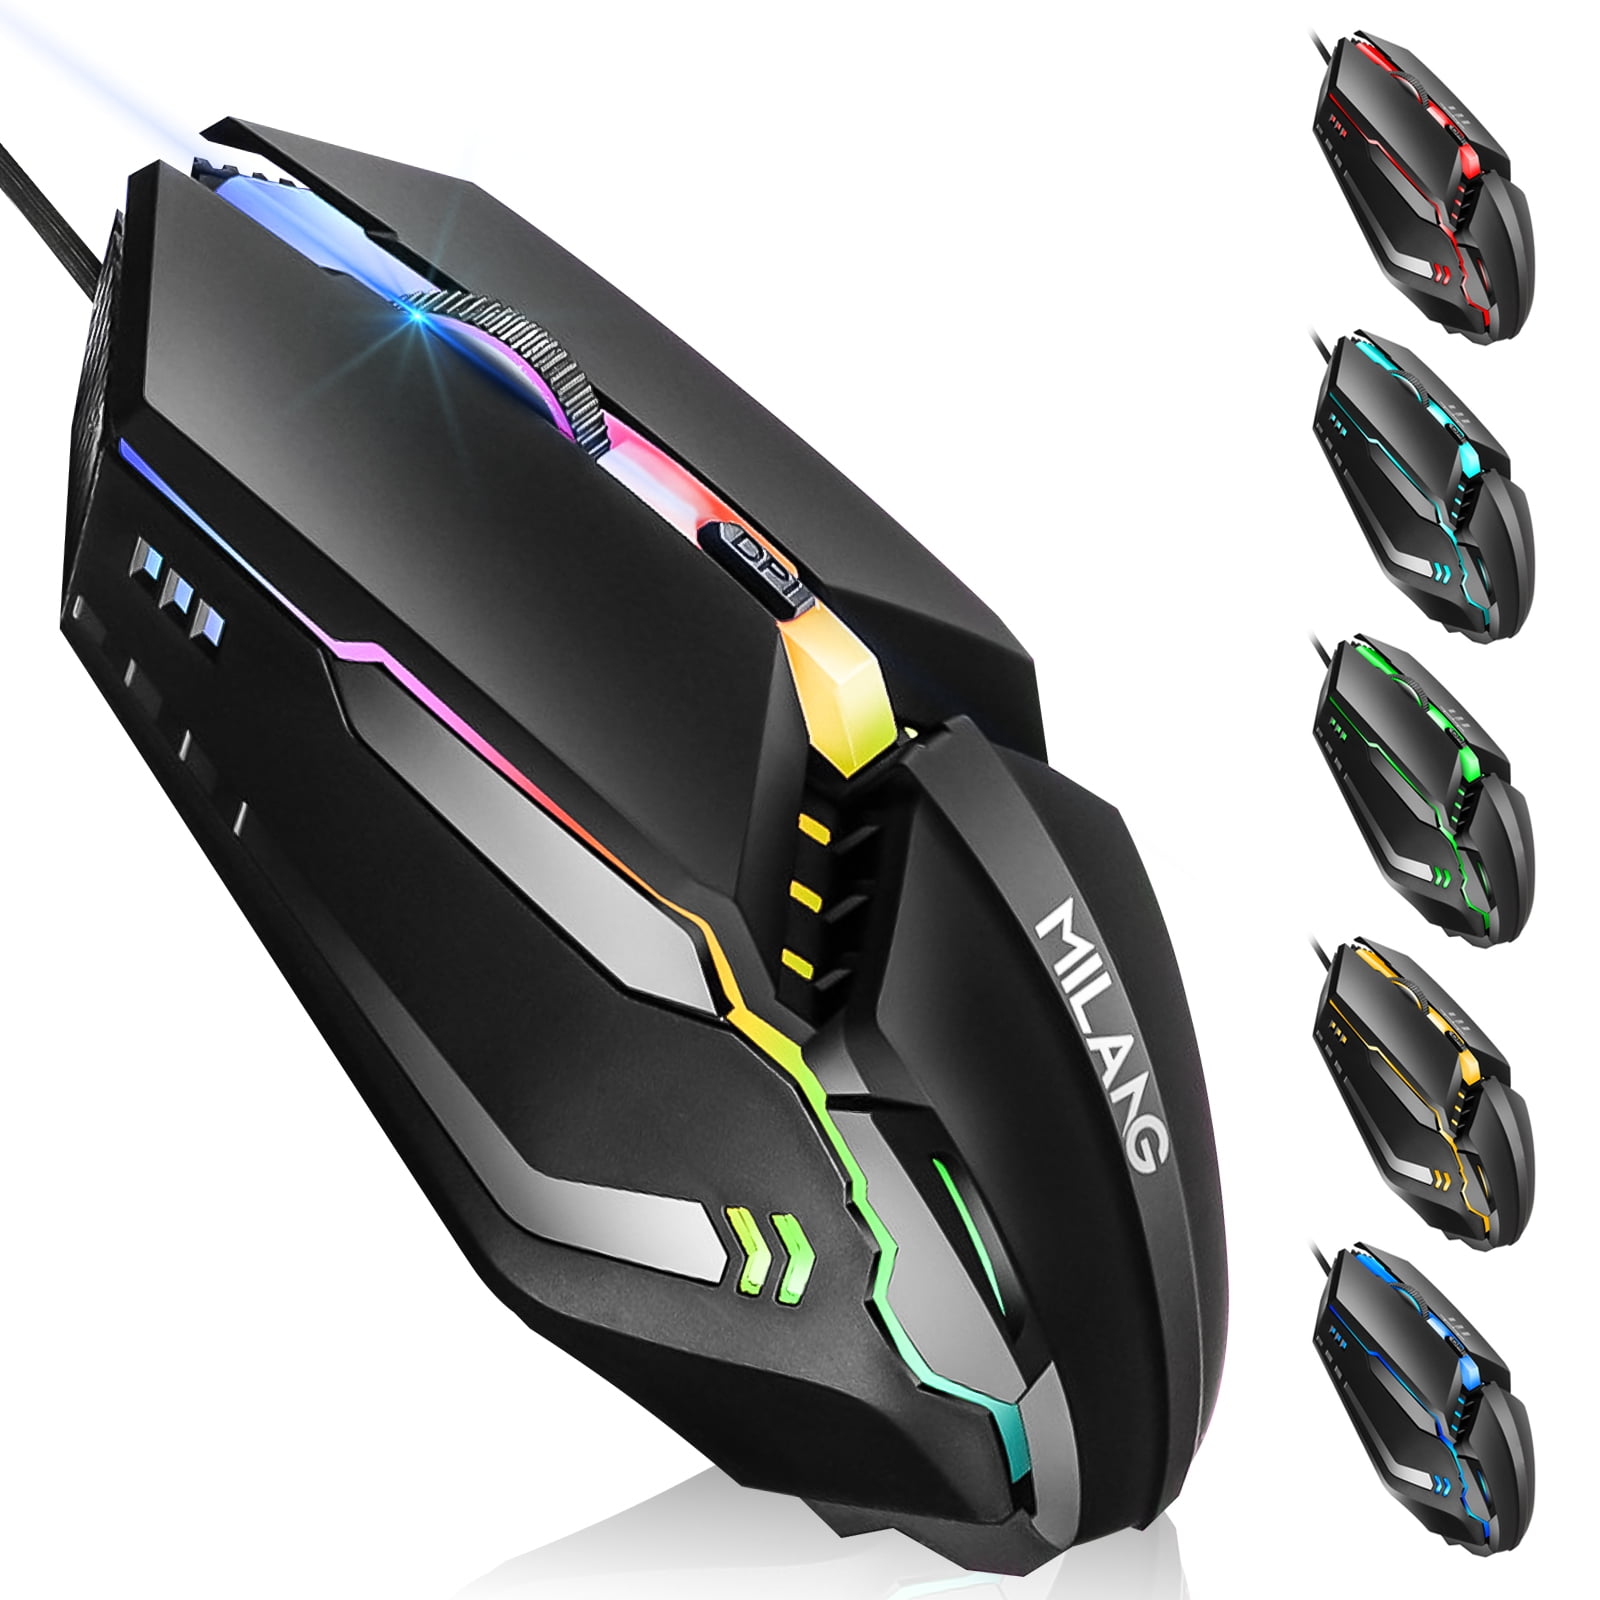 RGB Gaming Wired Programmable Mouse, Ergonomic USB Mice with 3 Level DPI, 7 Color Backlit, 4 Buttons, Gaming Mice for Desktop Laptop PC Computer, Windows 7/8/10/11/2000/XP/Vista Mac OS -